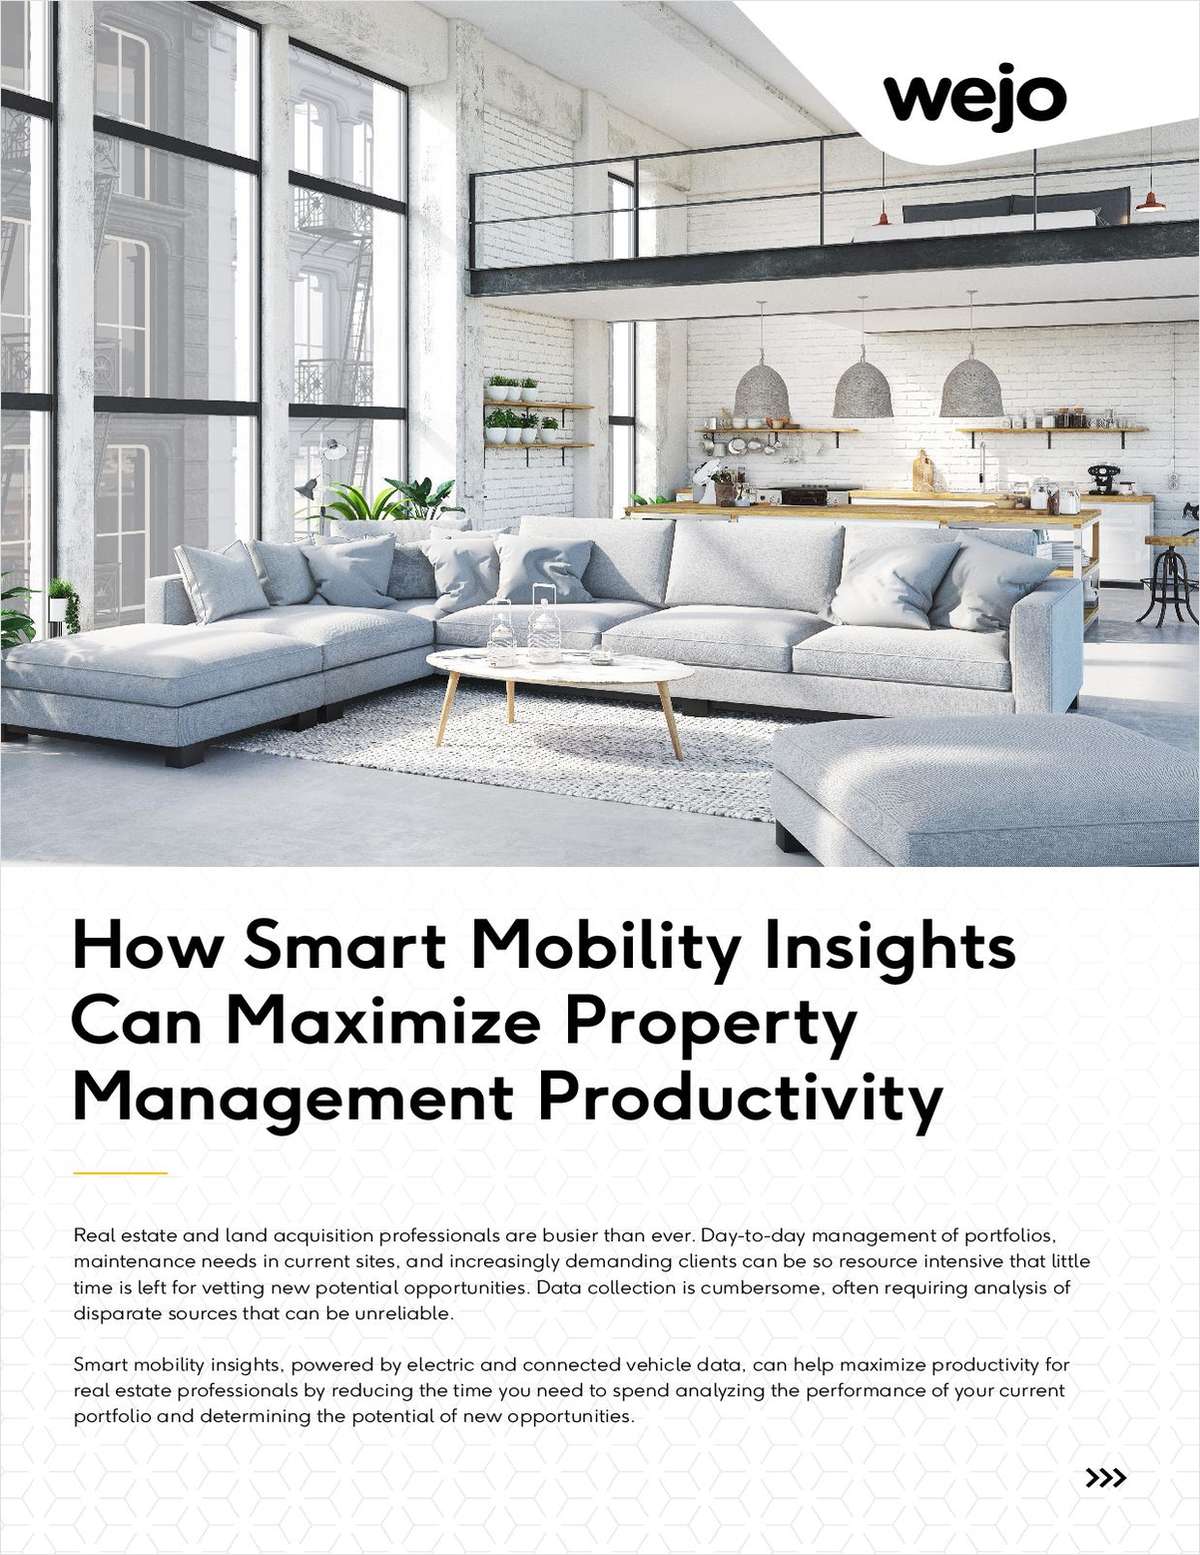 Real Estate: How Smart Mobility Insights Can Maximize Property Management Productivity